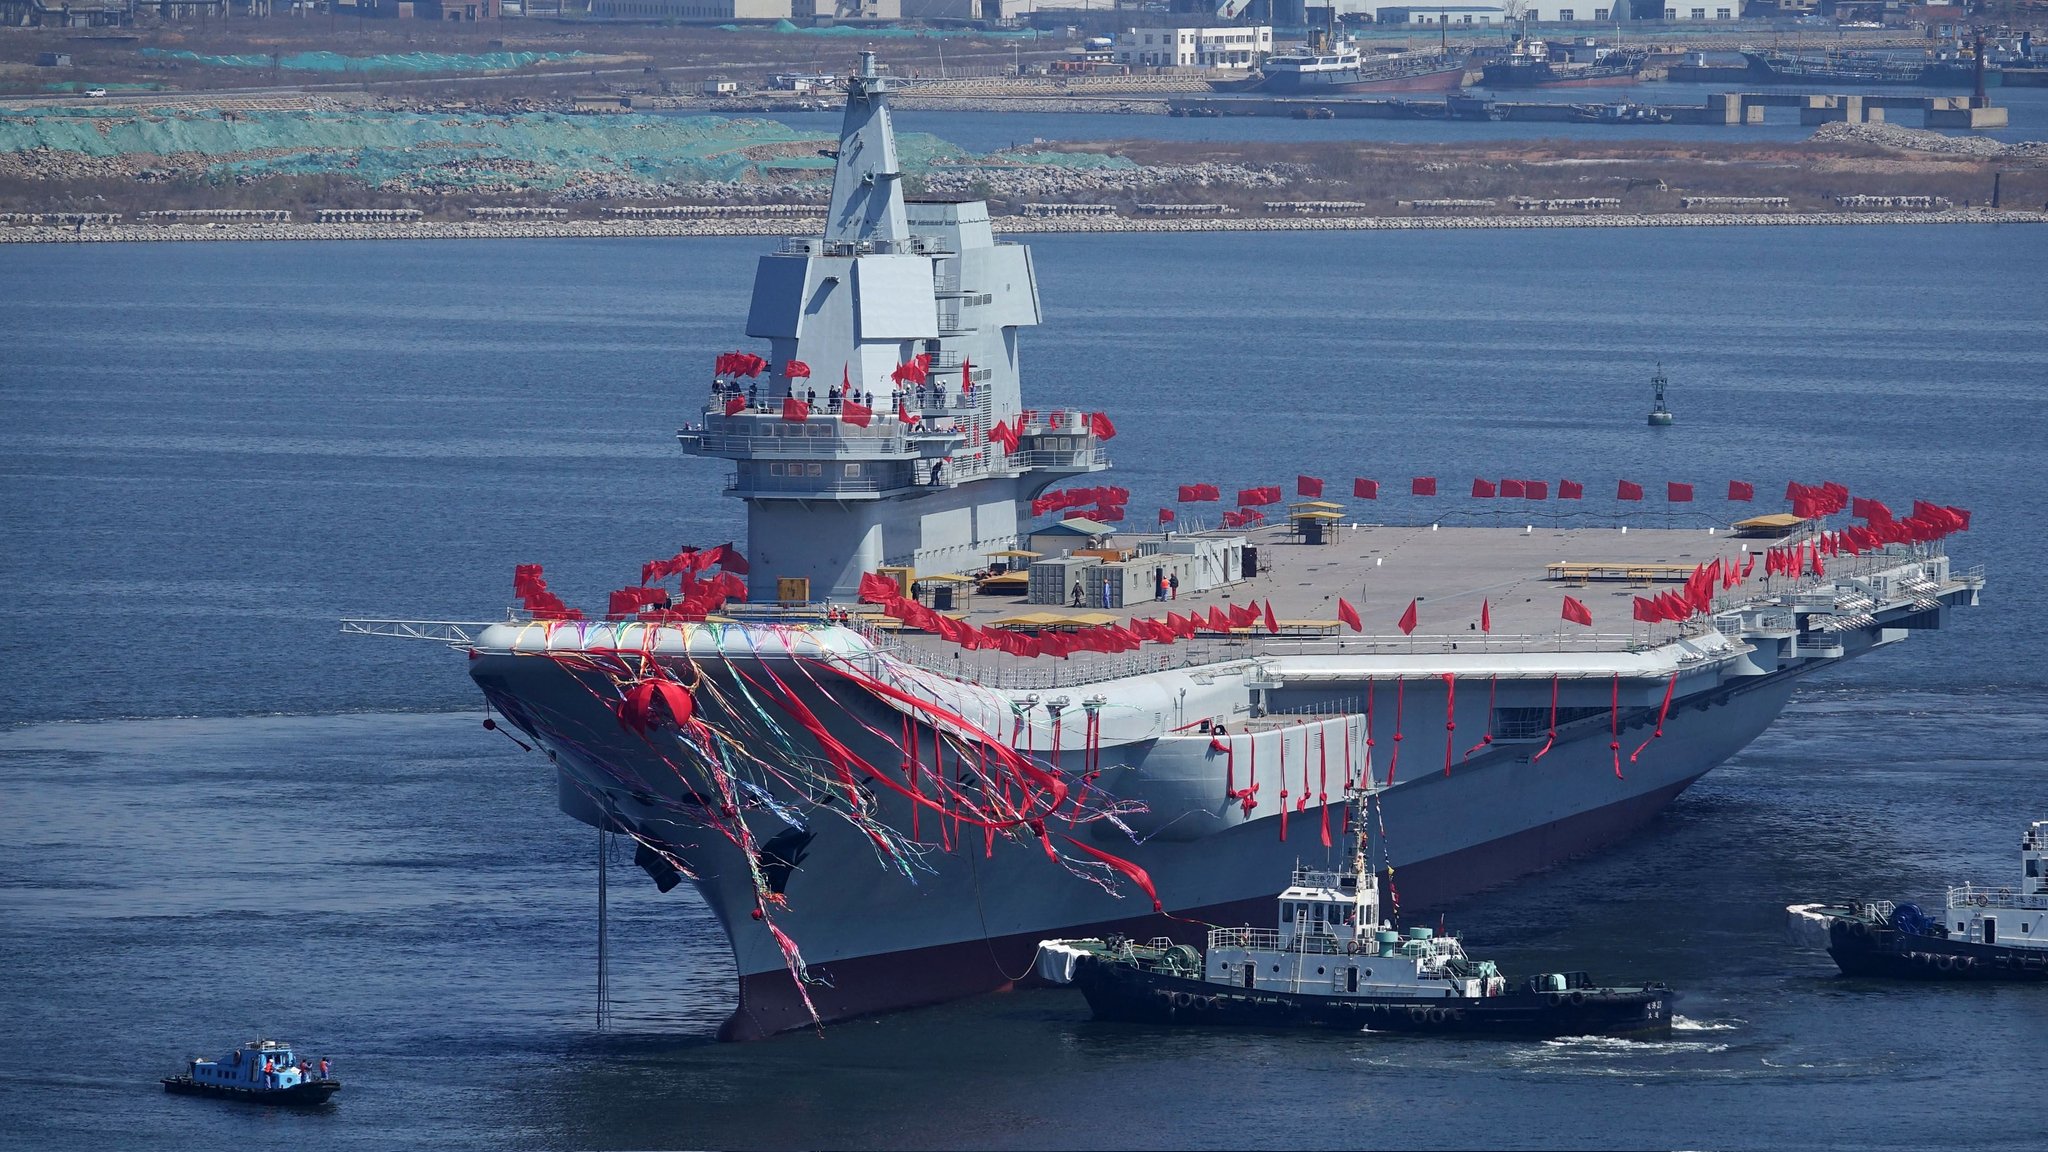 OSINT Updates 🚨 on Twitter: "🚨 China's second aircraft carrier the Shandong recently set out for realistic combat-oriented drills in the South China Sea https://t.co/d6nrJhuhGJ" / Twitter